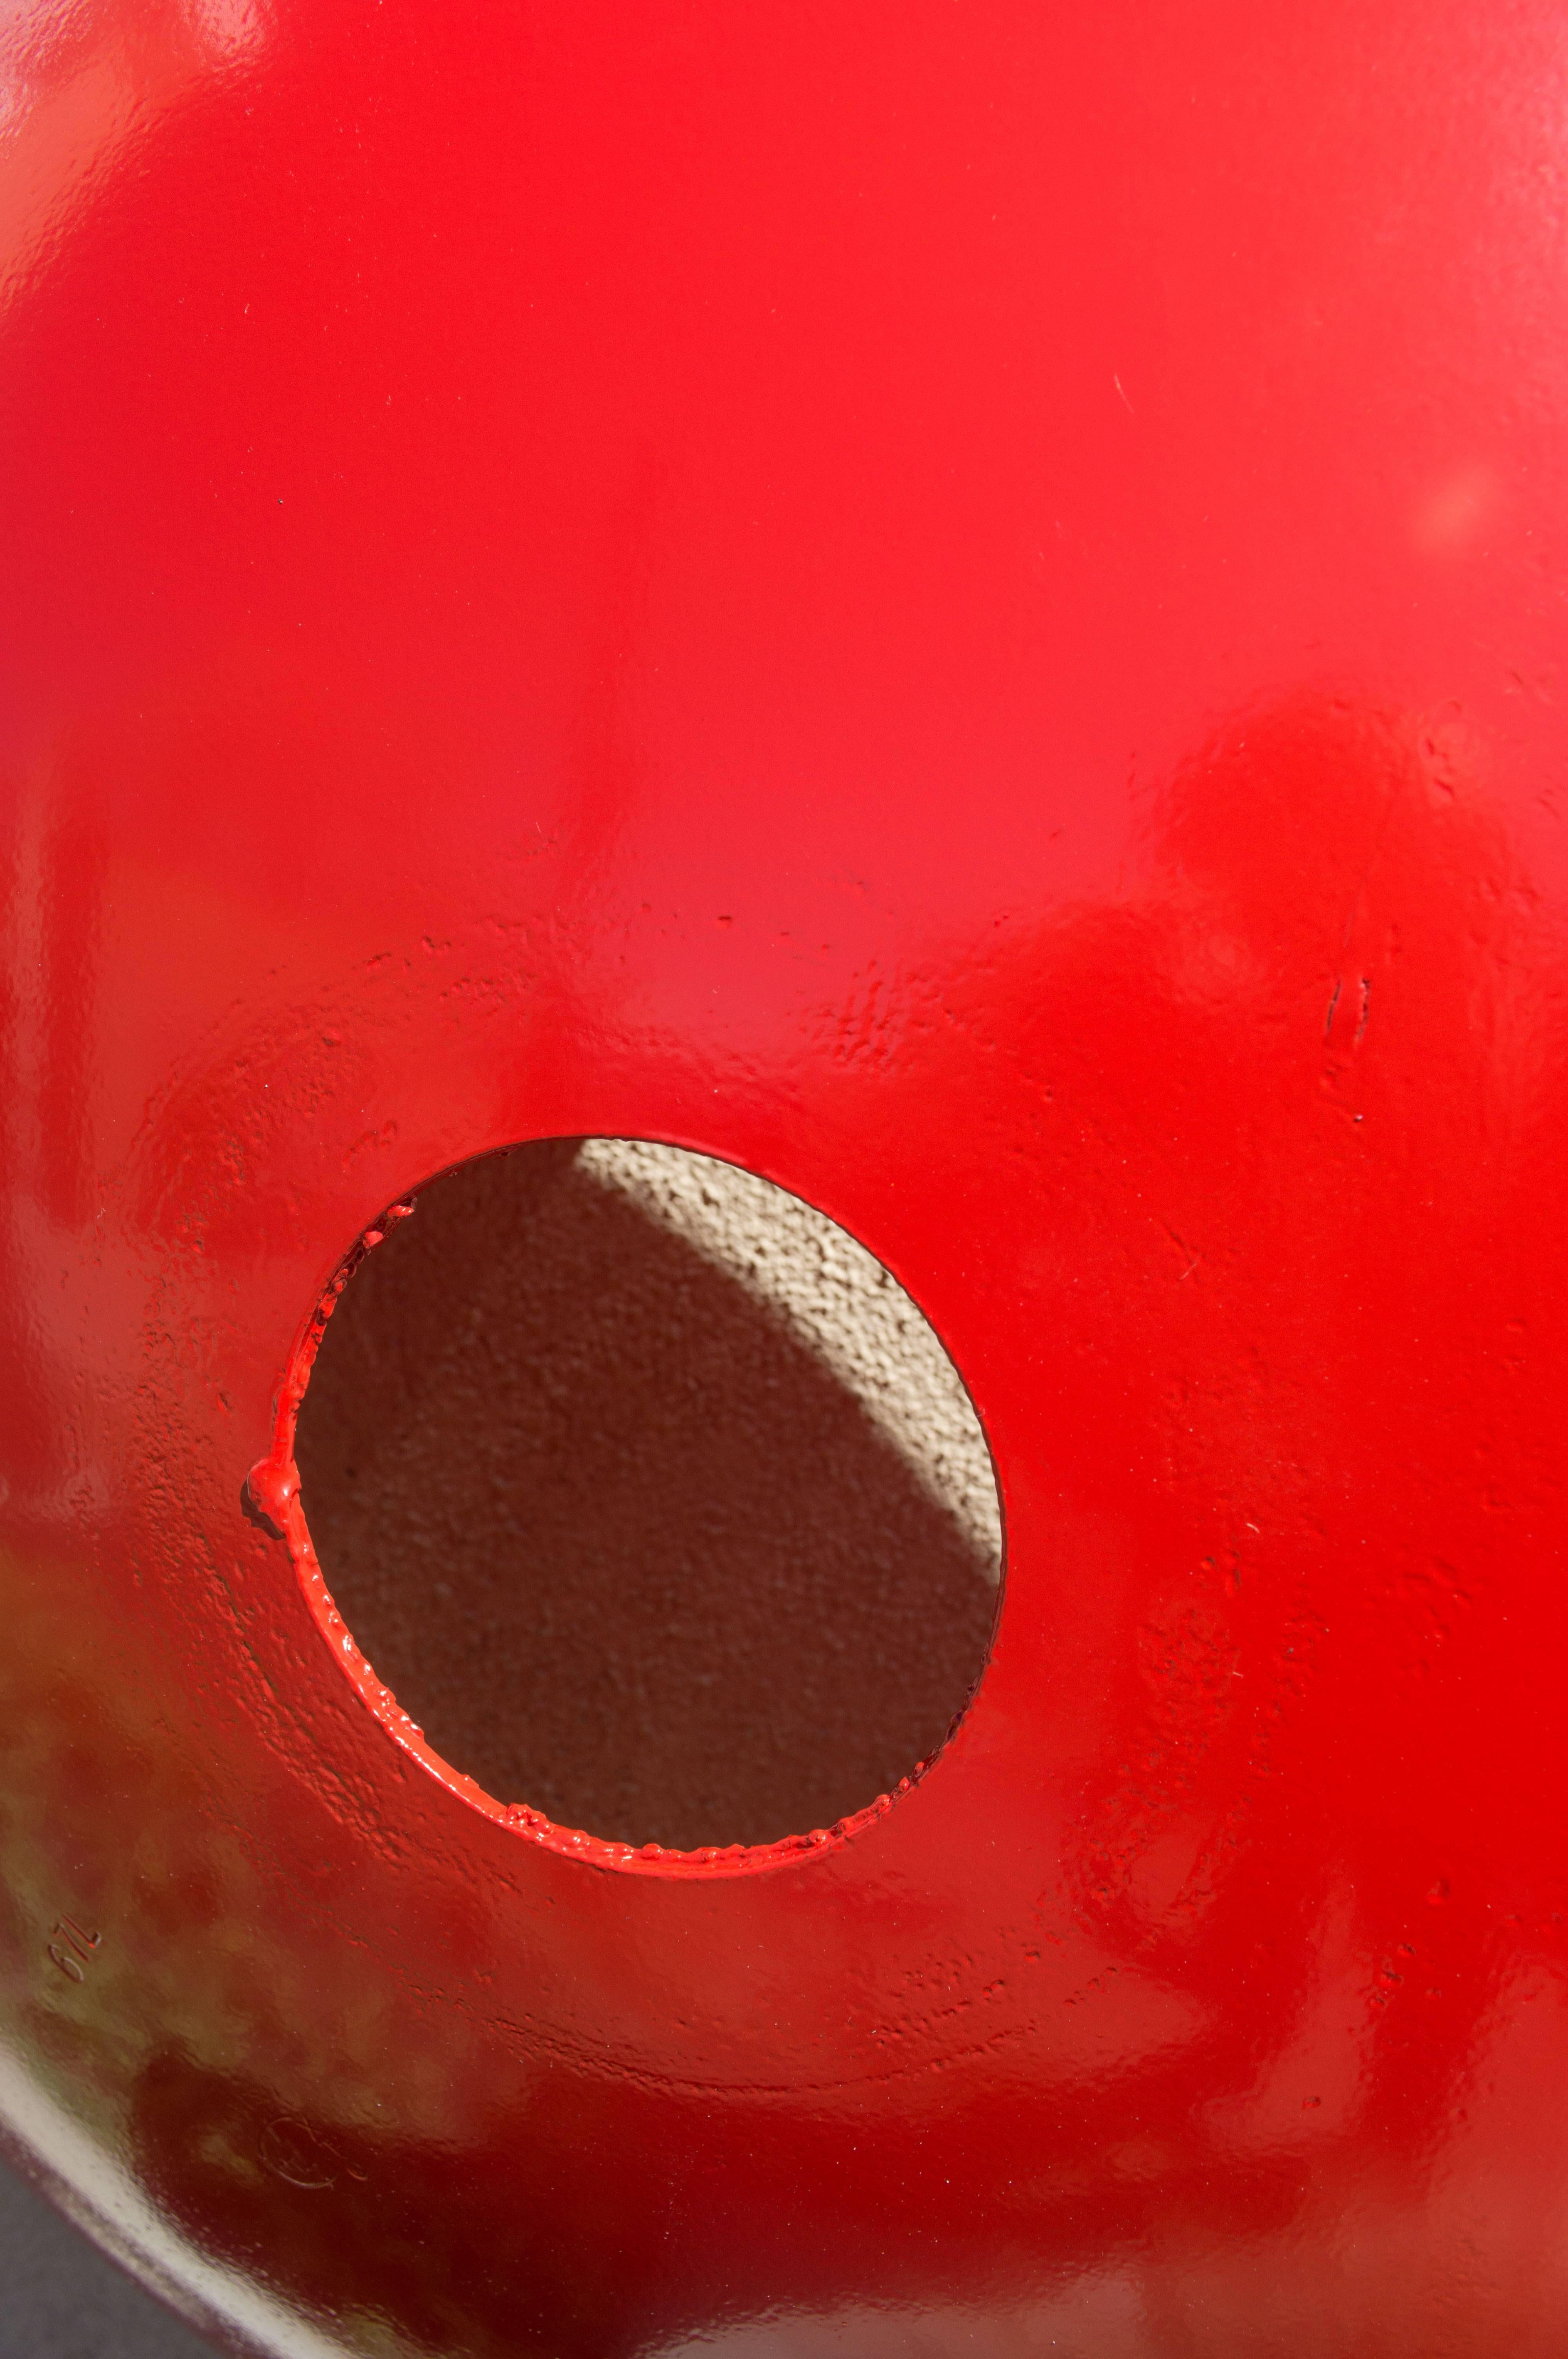 Terrace Disc, large red orange - Abstract Sculpture by Michael Freed and Adam Rosen